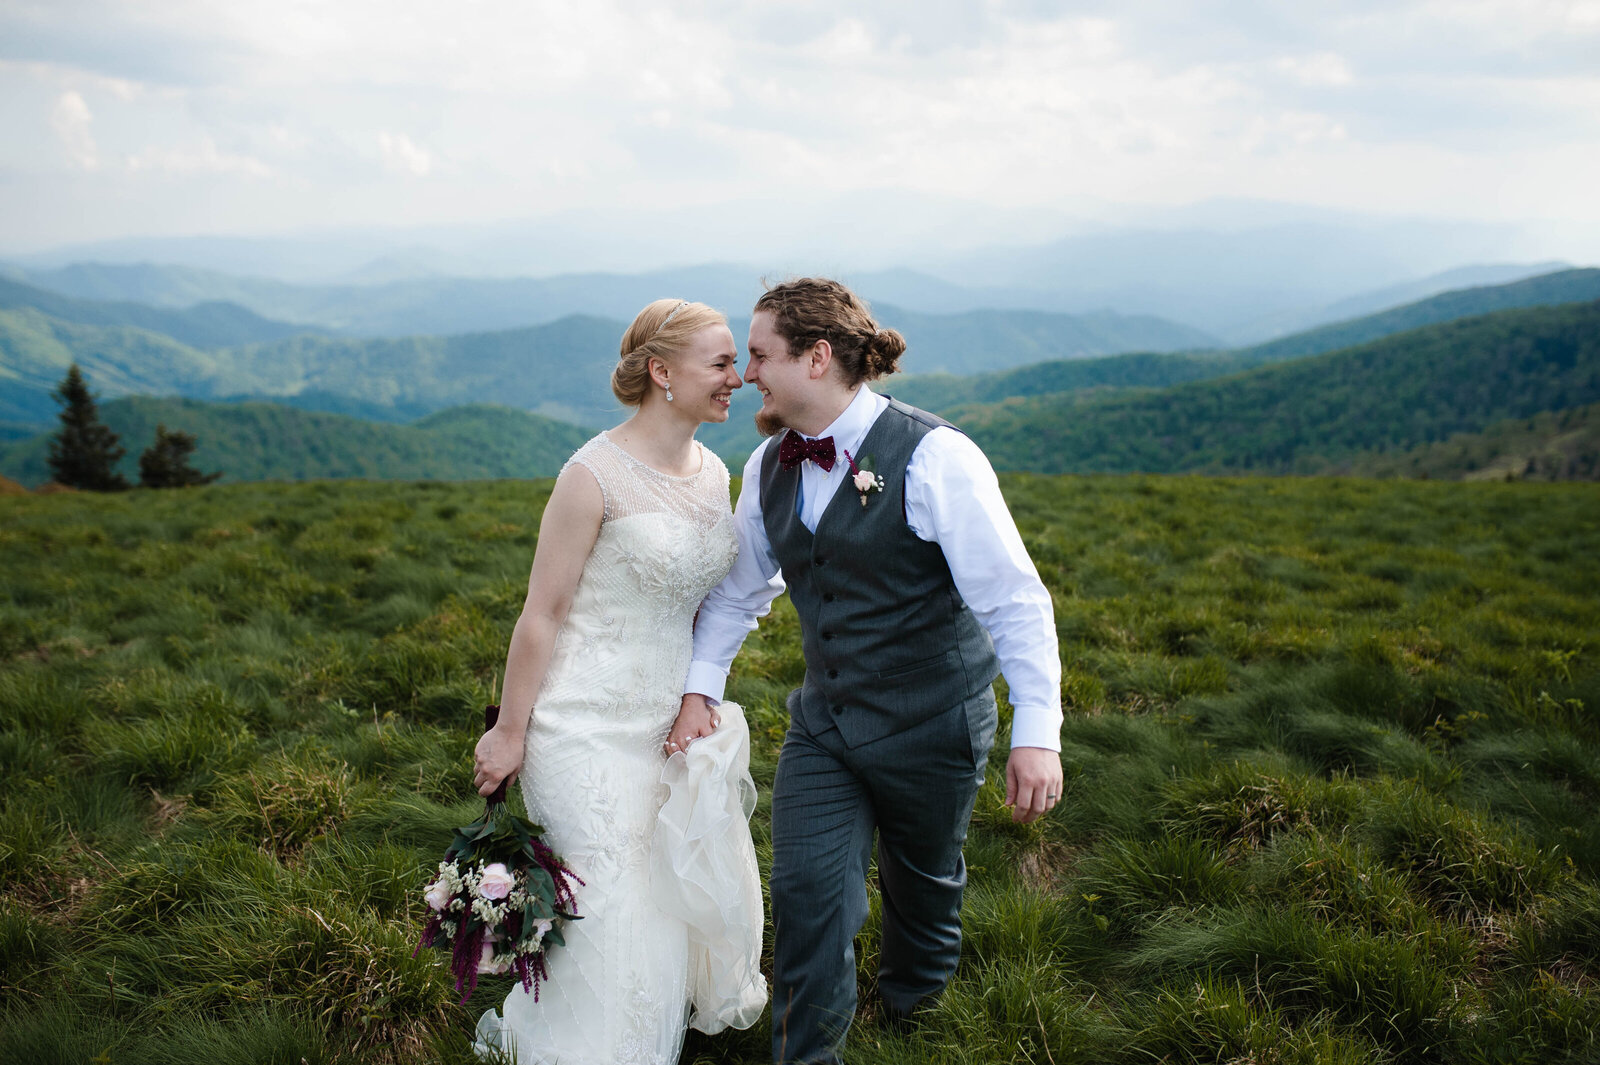 Knoxville Mountain Wedding Photo of Bride and Groom by Jaimie Renee